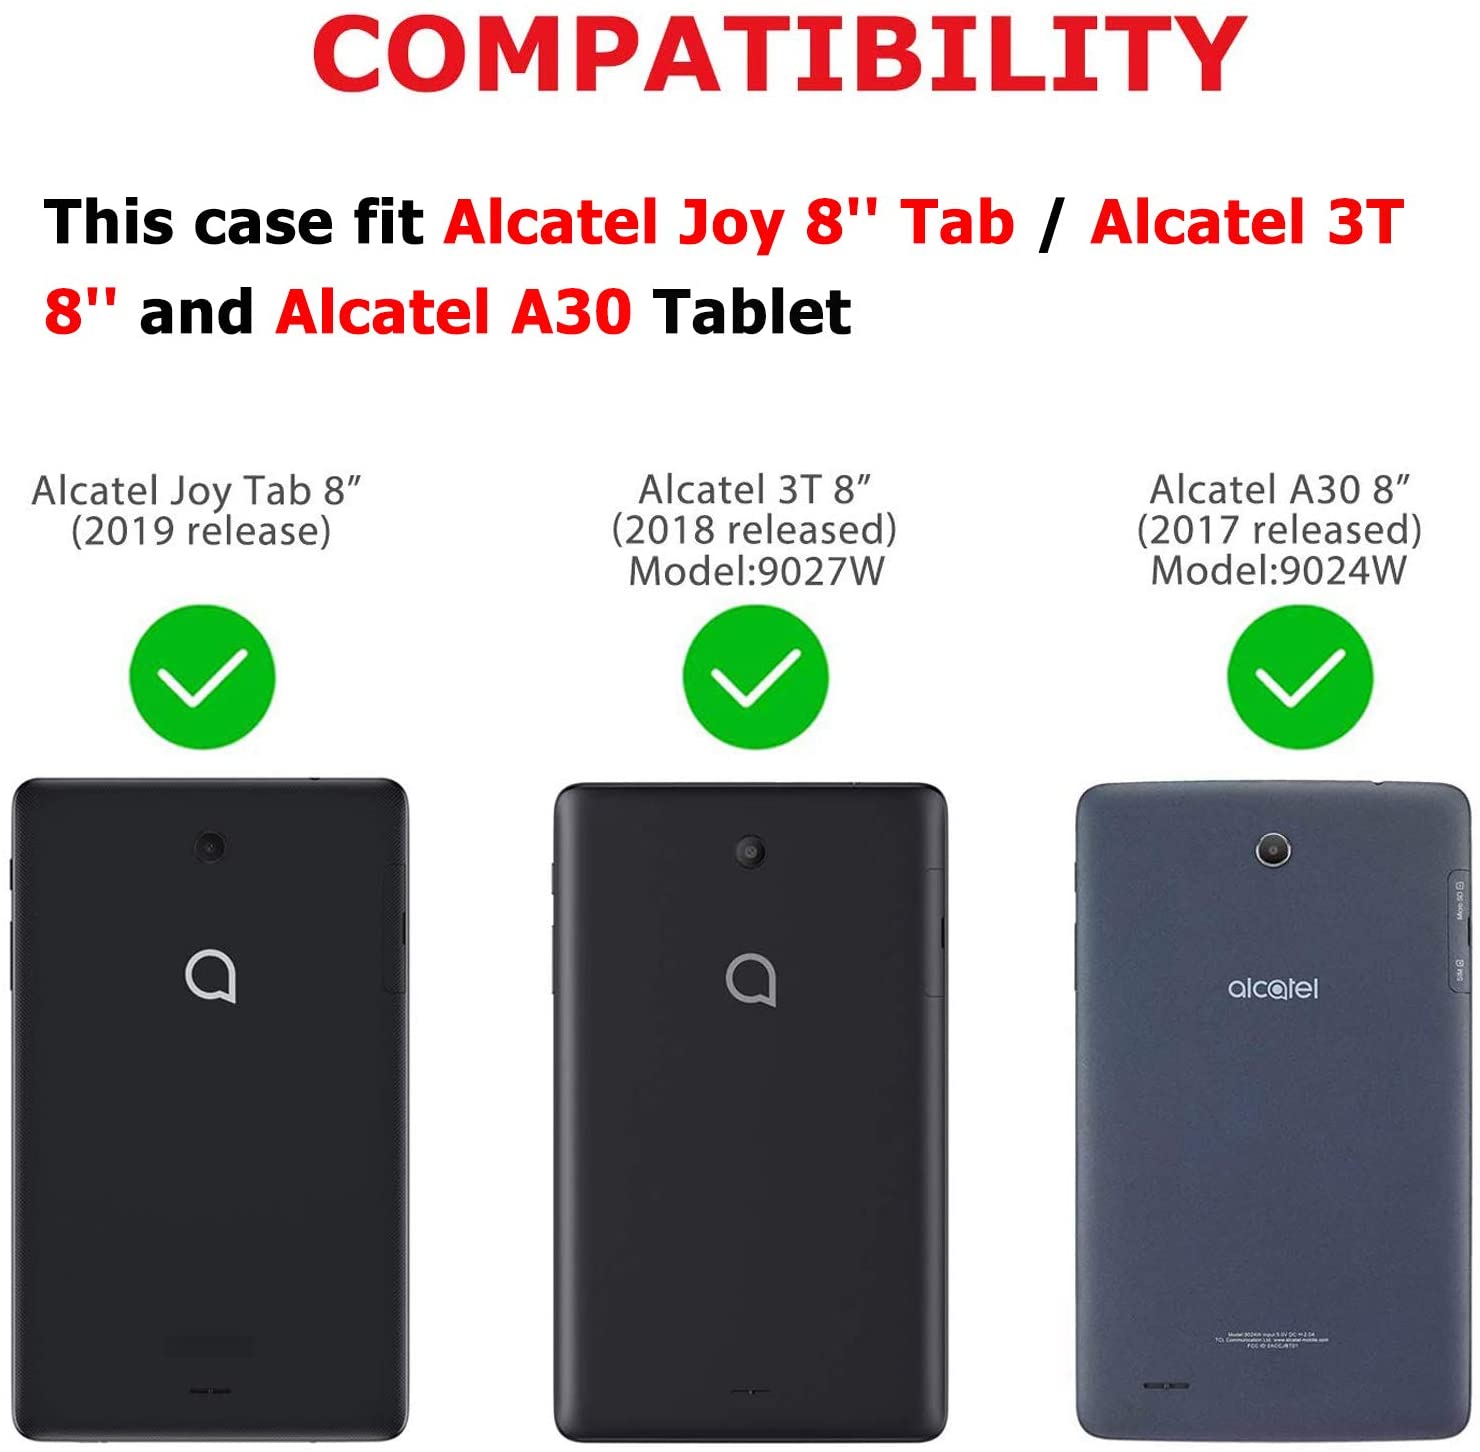 Case for Alcatel Joy Tab 8/ Alcatel 3T/ A30 8 Tablet - Light Weight Shock  Proof Convertible Handle Stand Kids Case for Alcatel Joy Tab 2019/ Alcatel  3T 2018/ Alcatel A30 2017 8''Tablet, Black - PC Circle